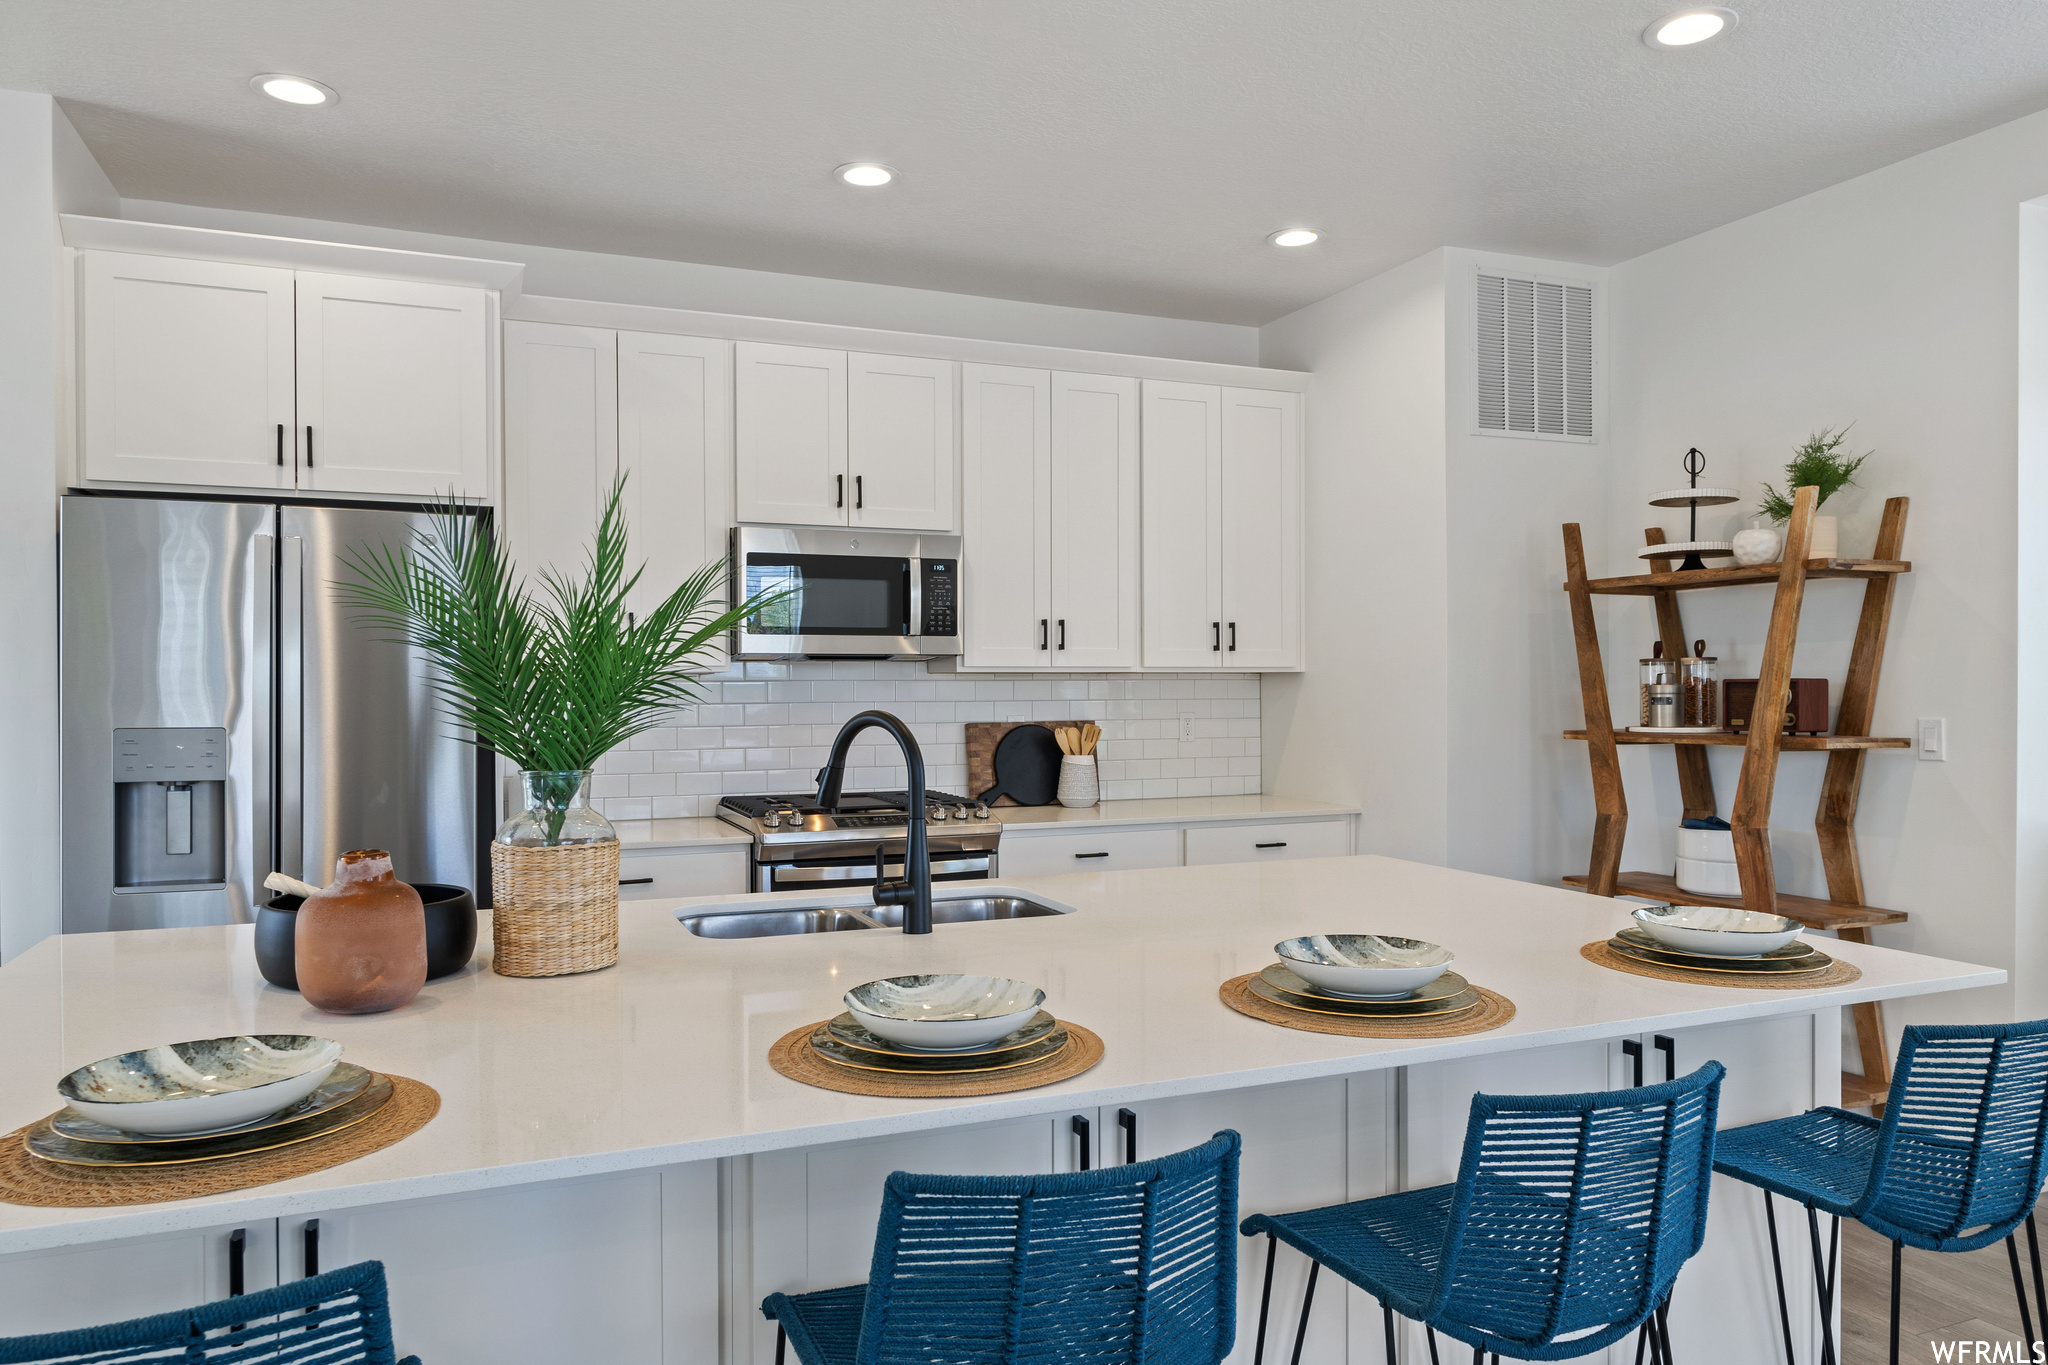 Kitchen with a breakfast bar, white cabinets, appliances with stainless steel finishes, and backsplash